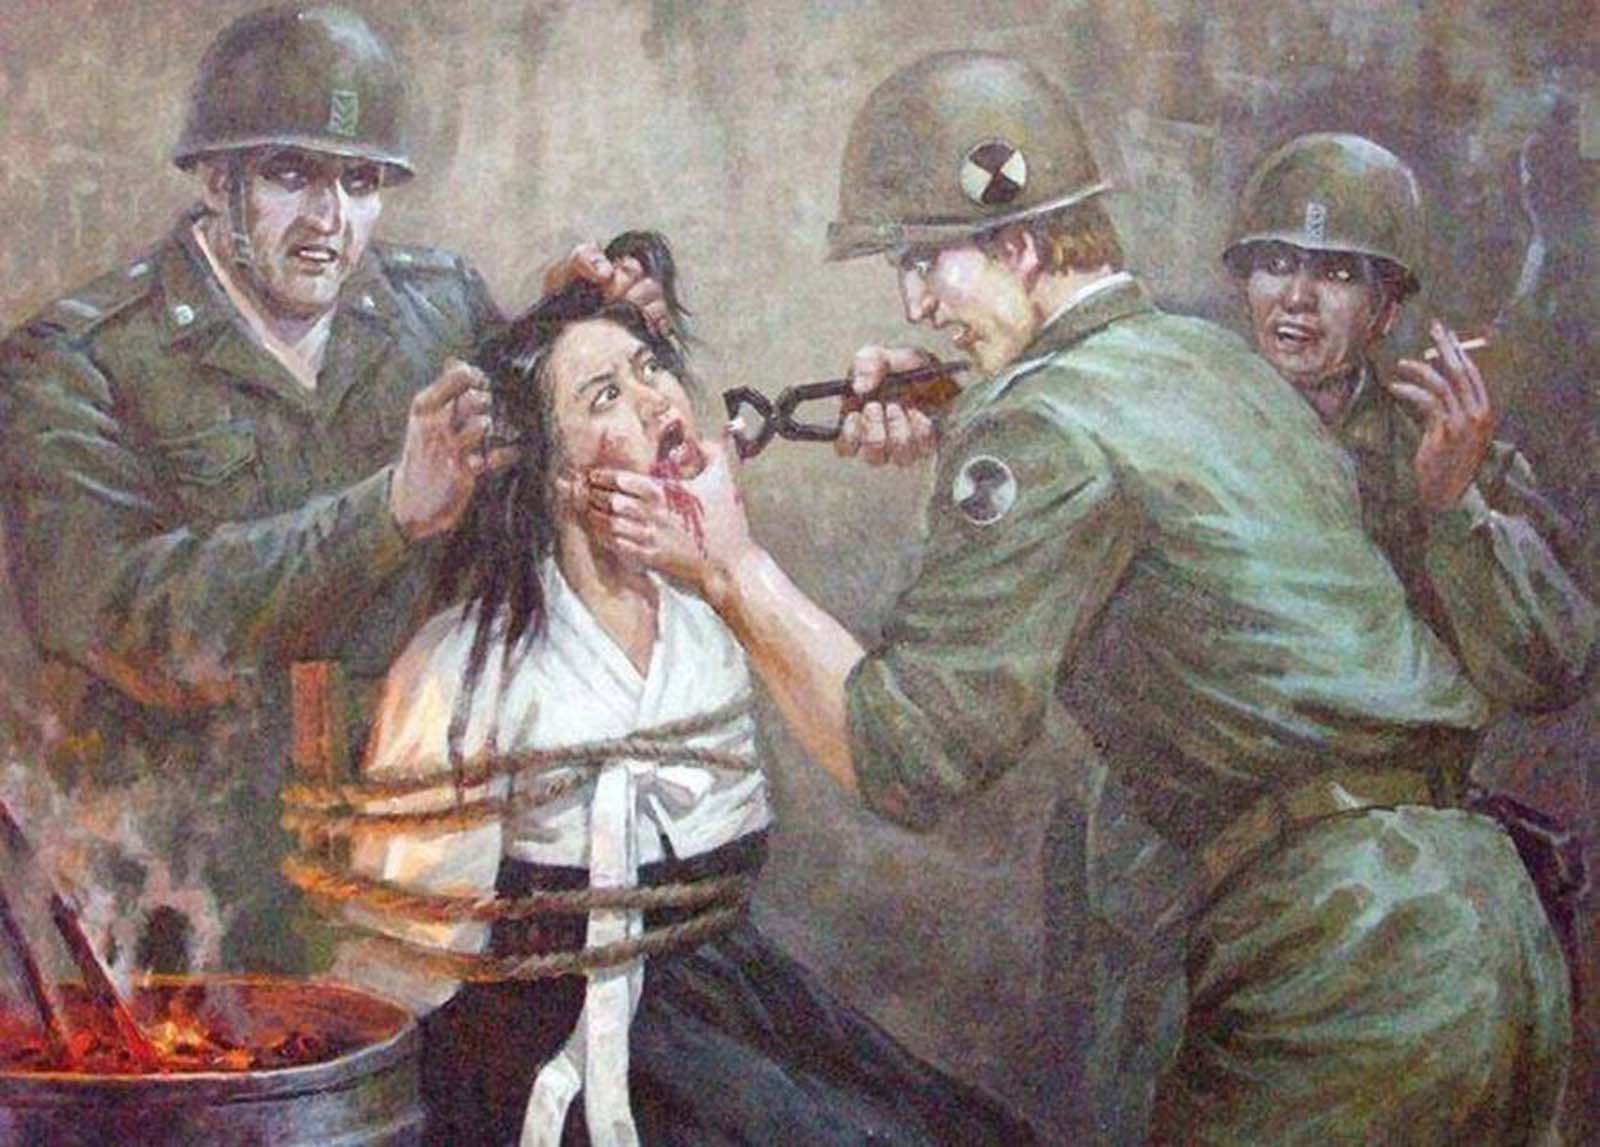 One soldier yanks the teeth from a Korean woman.